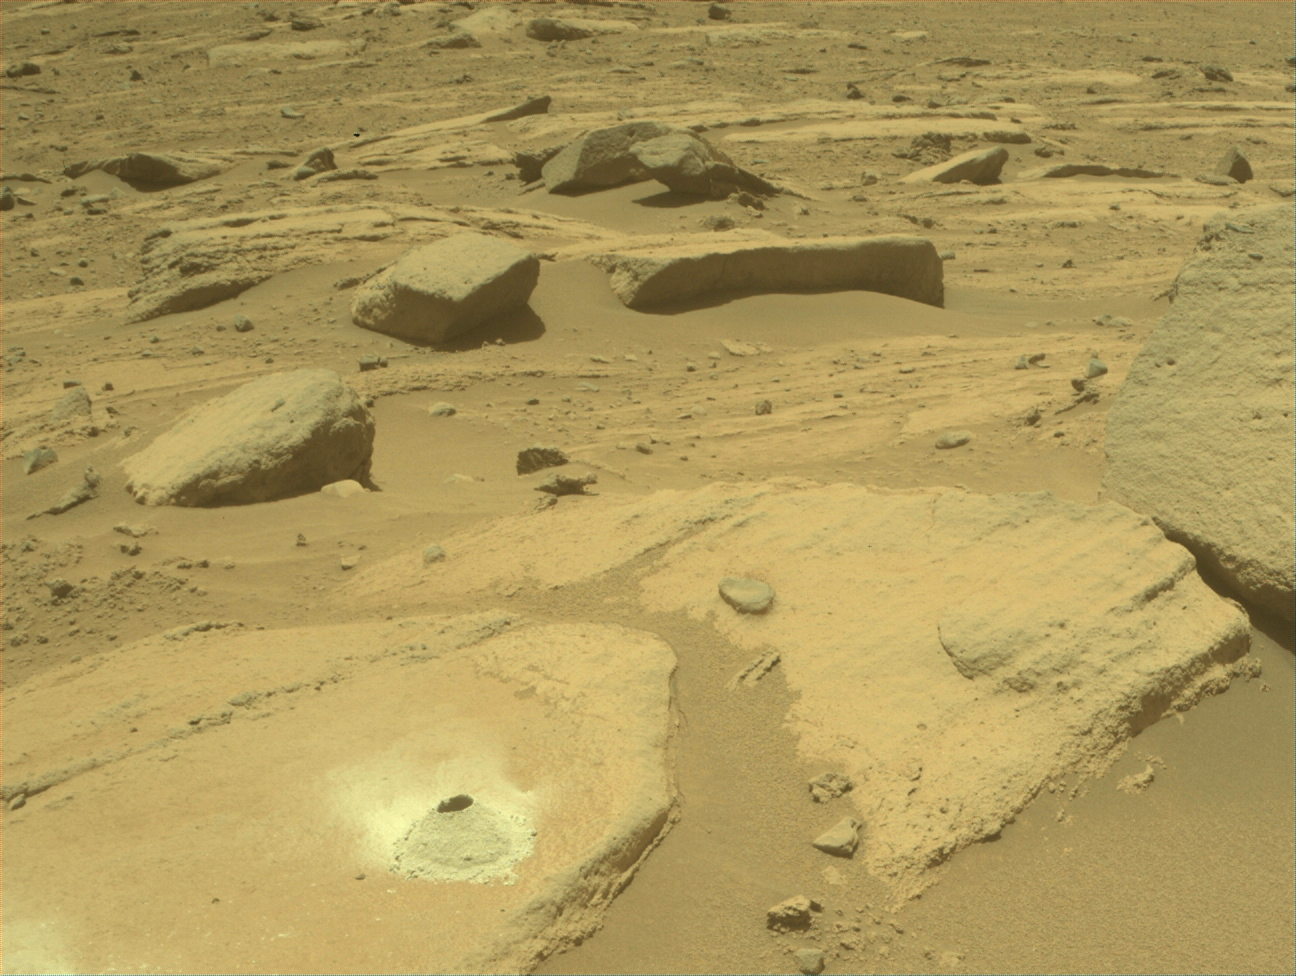 Image taken was taken by the Mars Perseverance rover after collecting the rock sample 19 at Melyn.